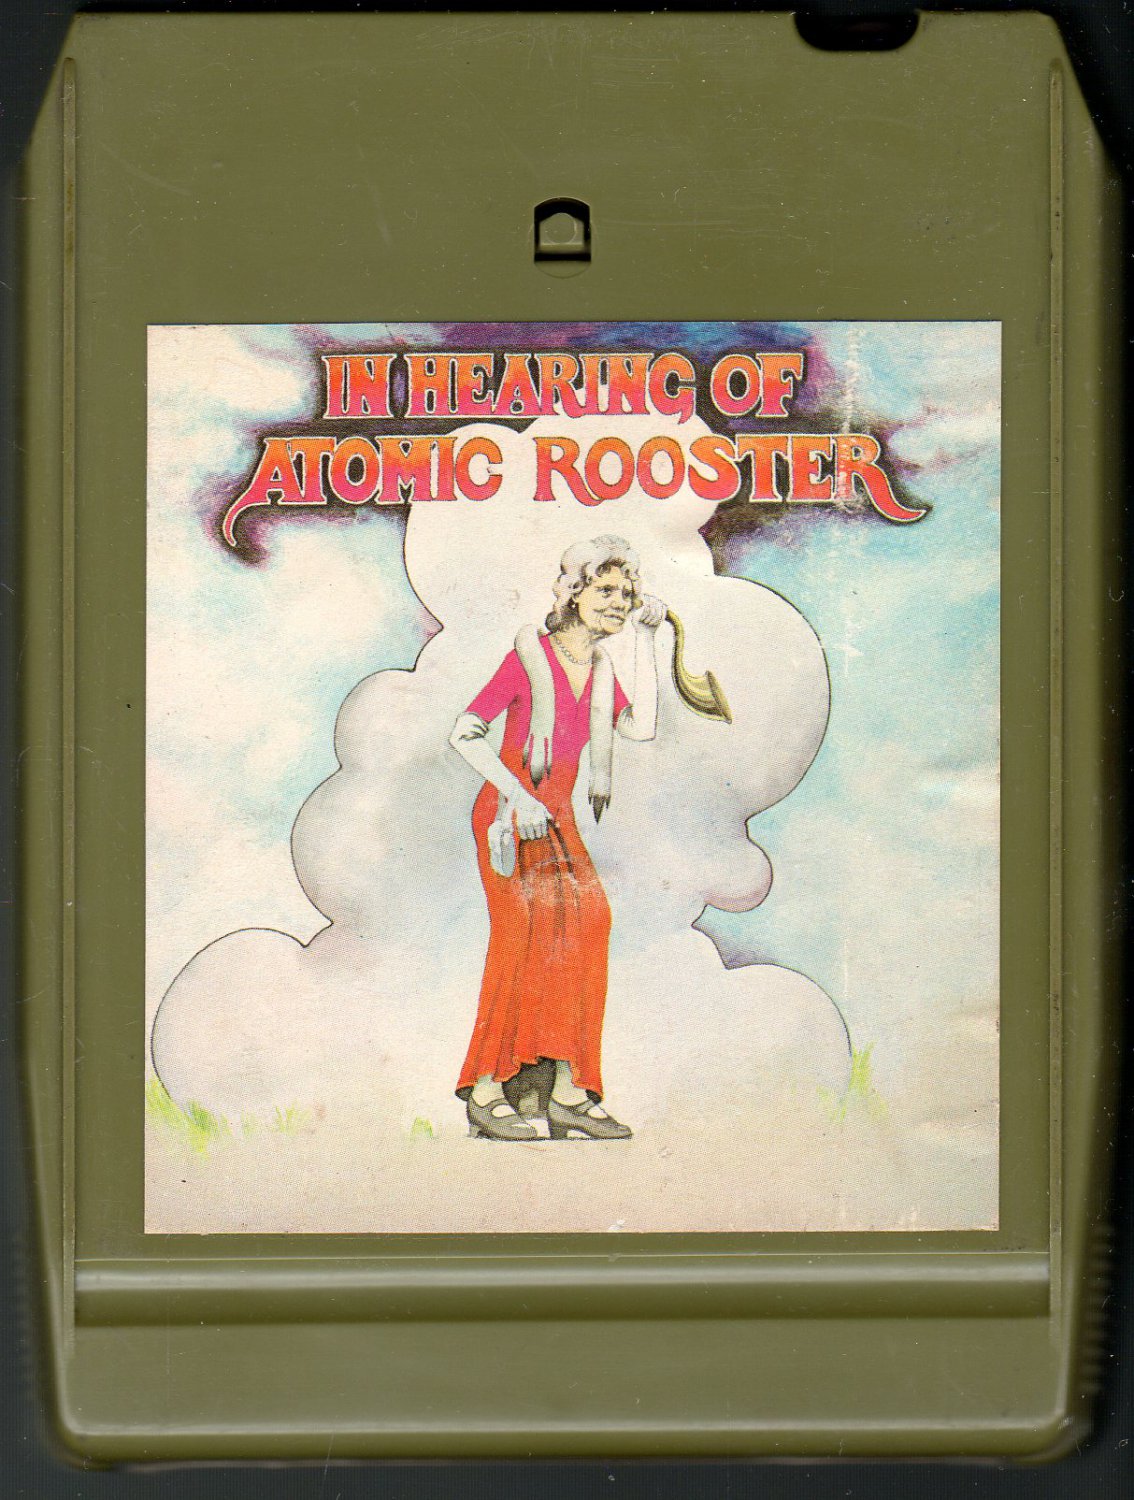 Atomic Rooster - In Hearing Of 1971 ELEKTRA 8-track tape